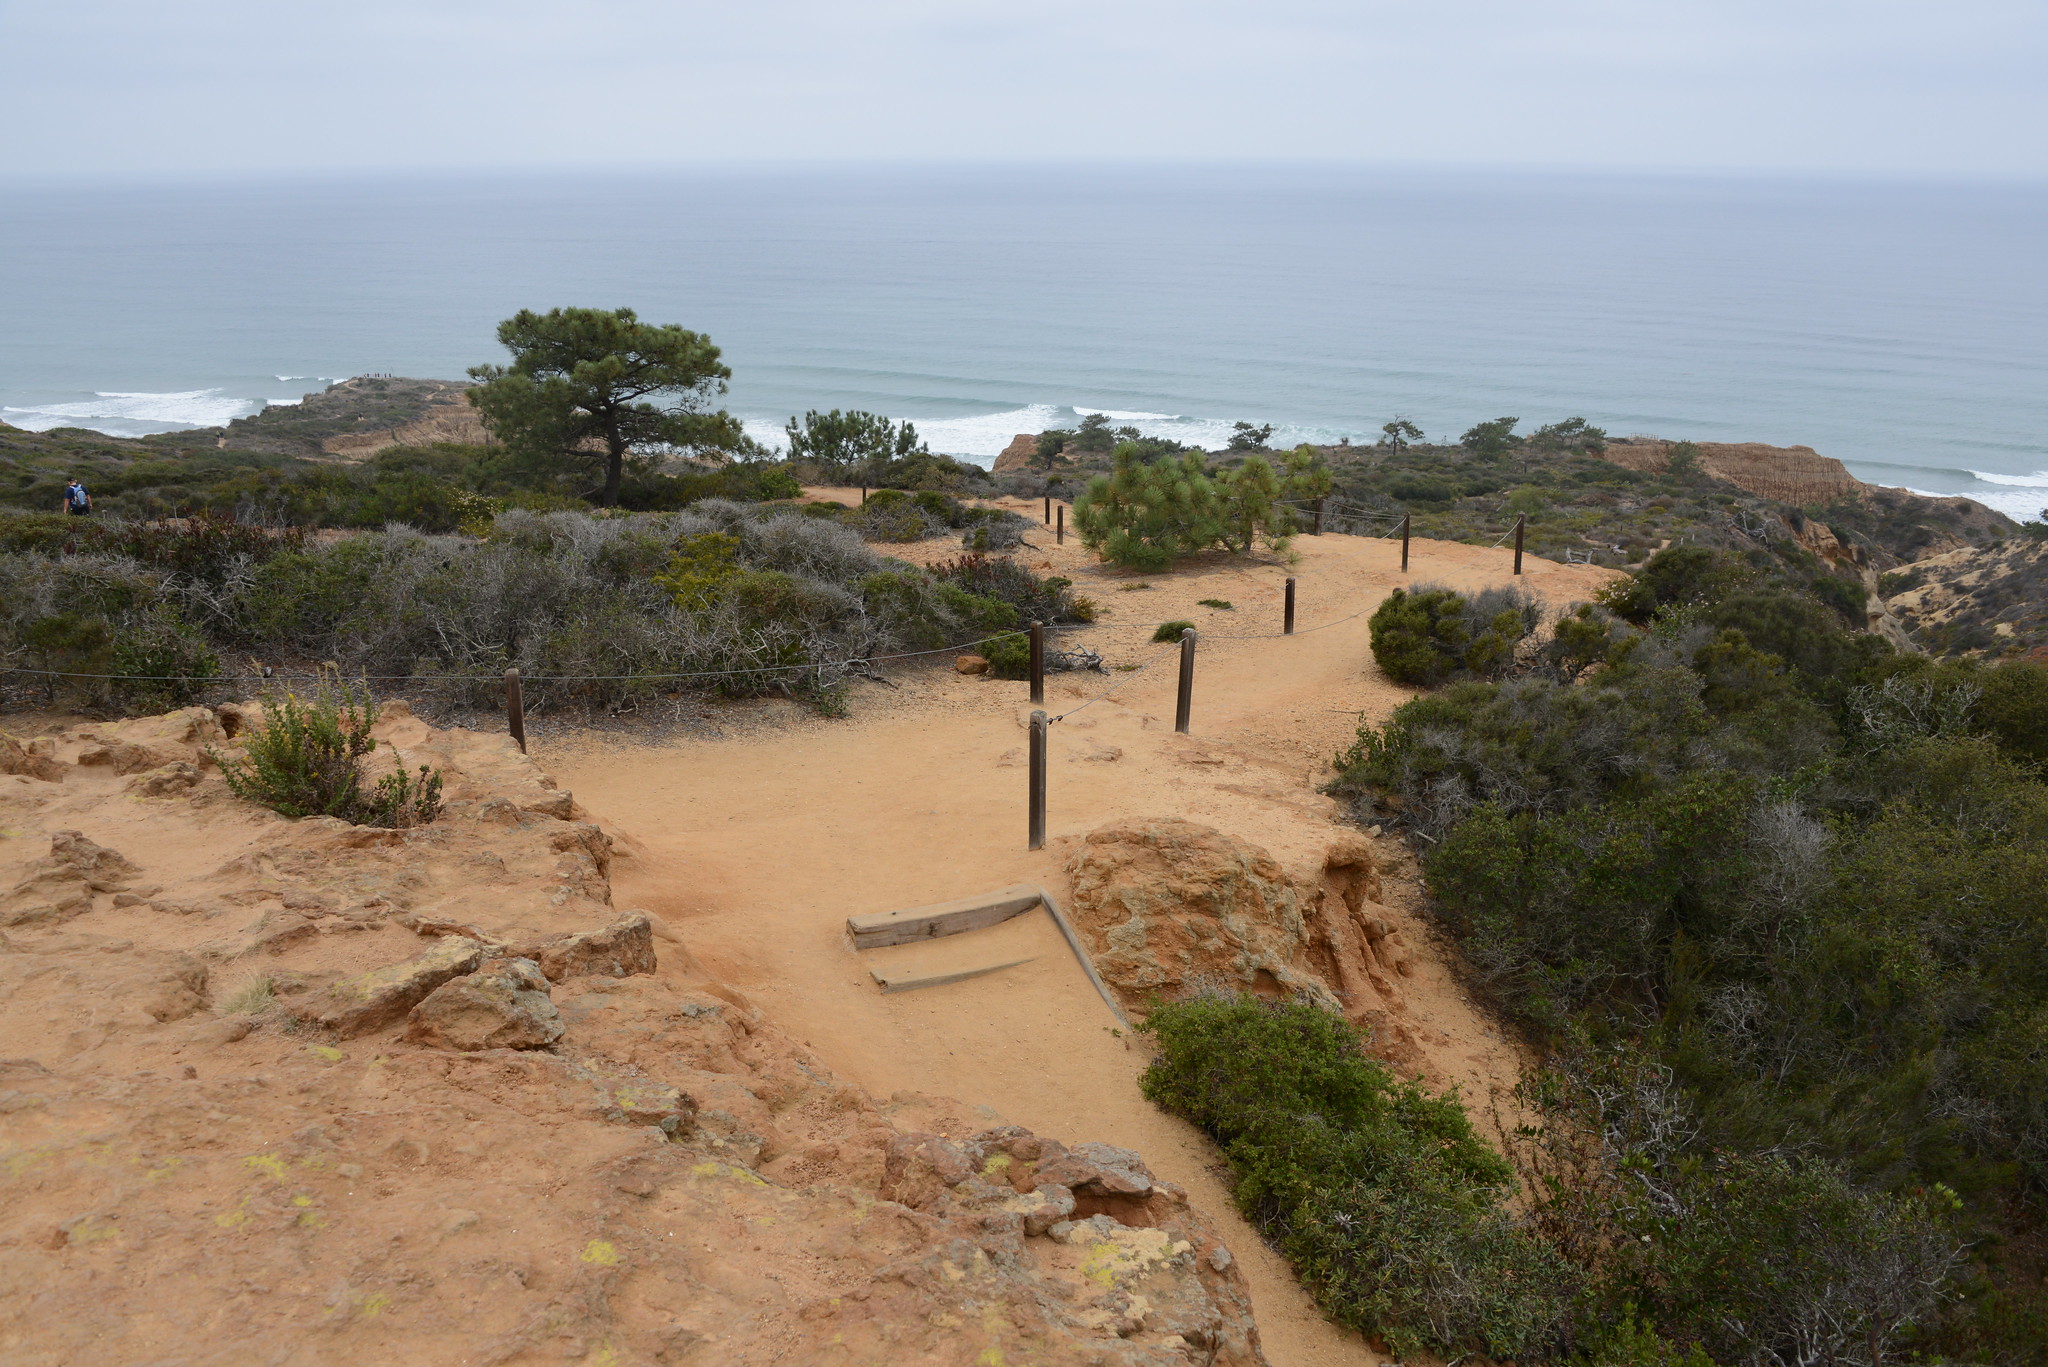 Looking down to the shore at Torrey Pines State Reserve